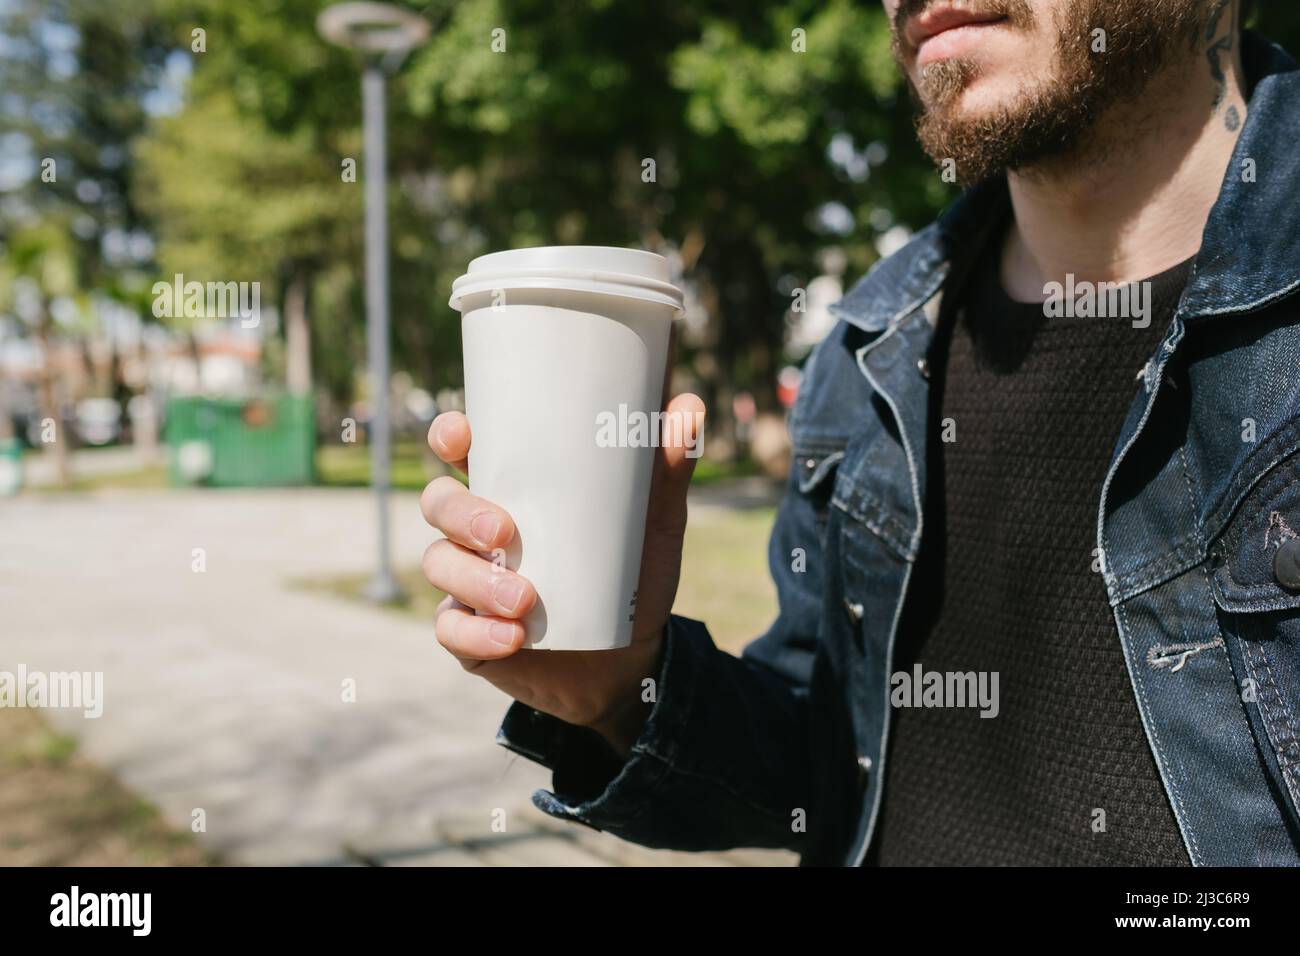 Cardboard coffee cup, young man with tattoo on neck holding coffee cup, a sunny park and fun Stock Photo